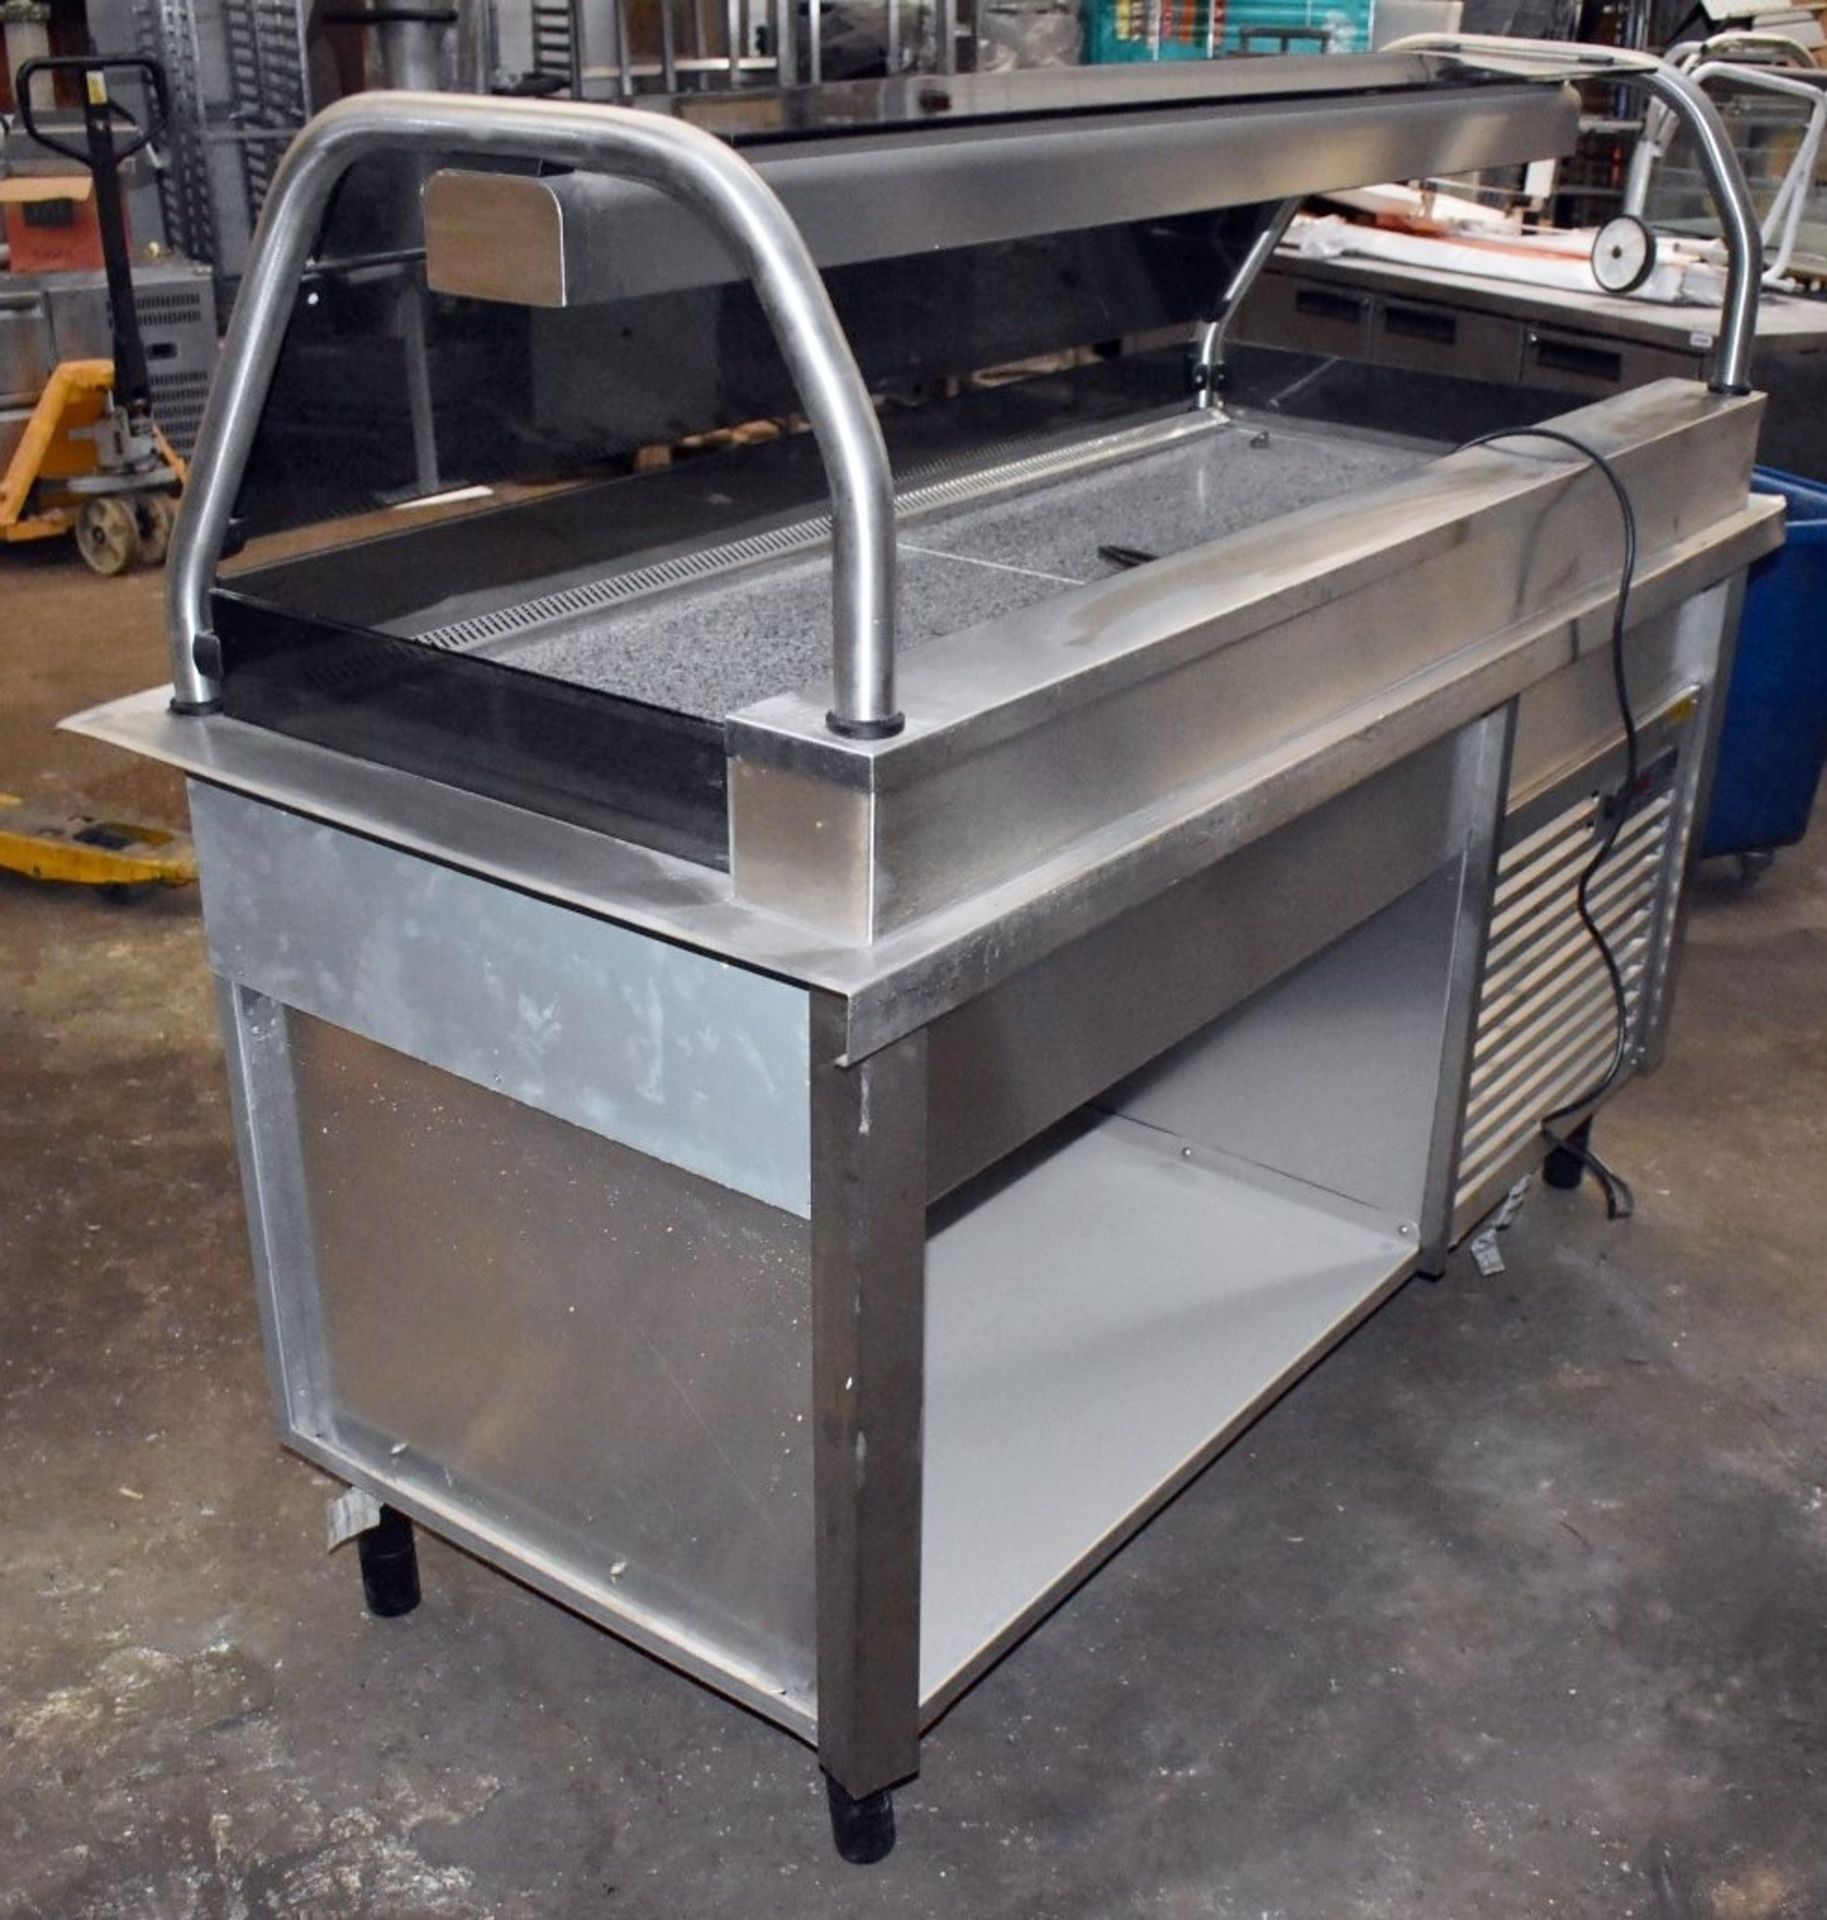 1 x Grundy Commercial Refrigerated Servery Unit With Stone Internal Panels - Stainless Steel - Image 18 of 18